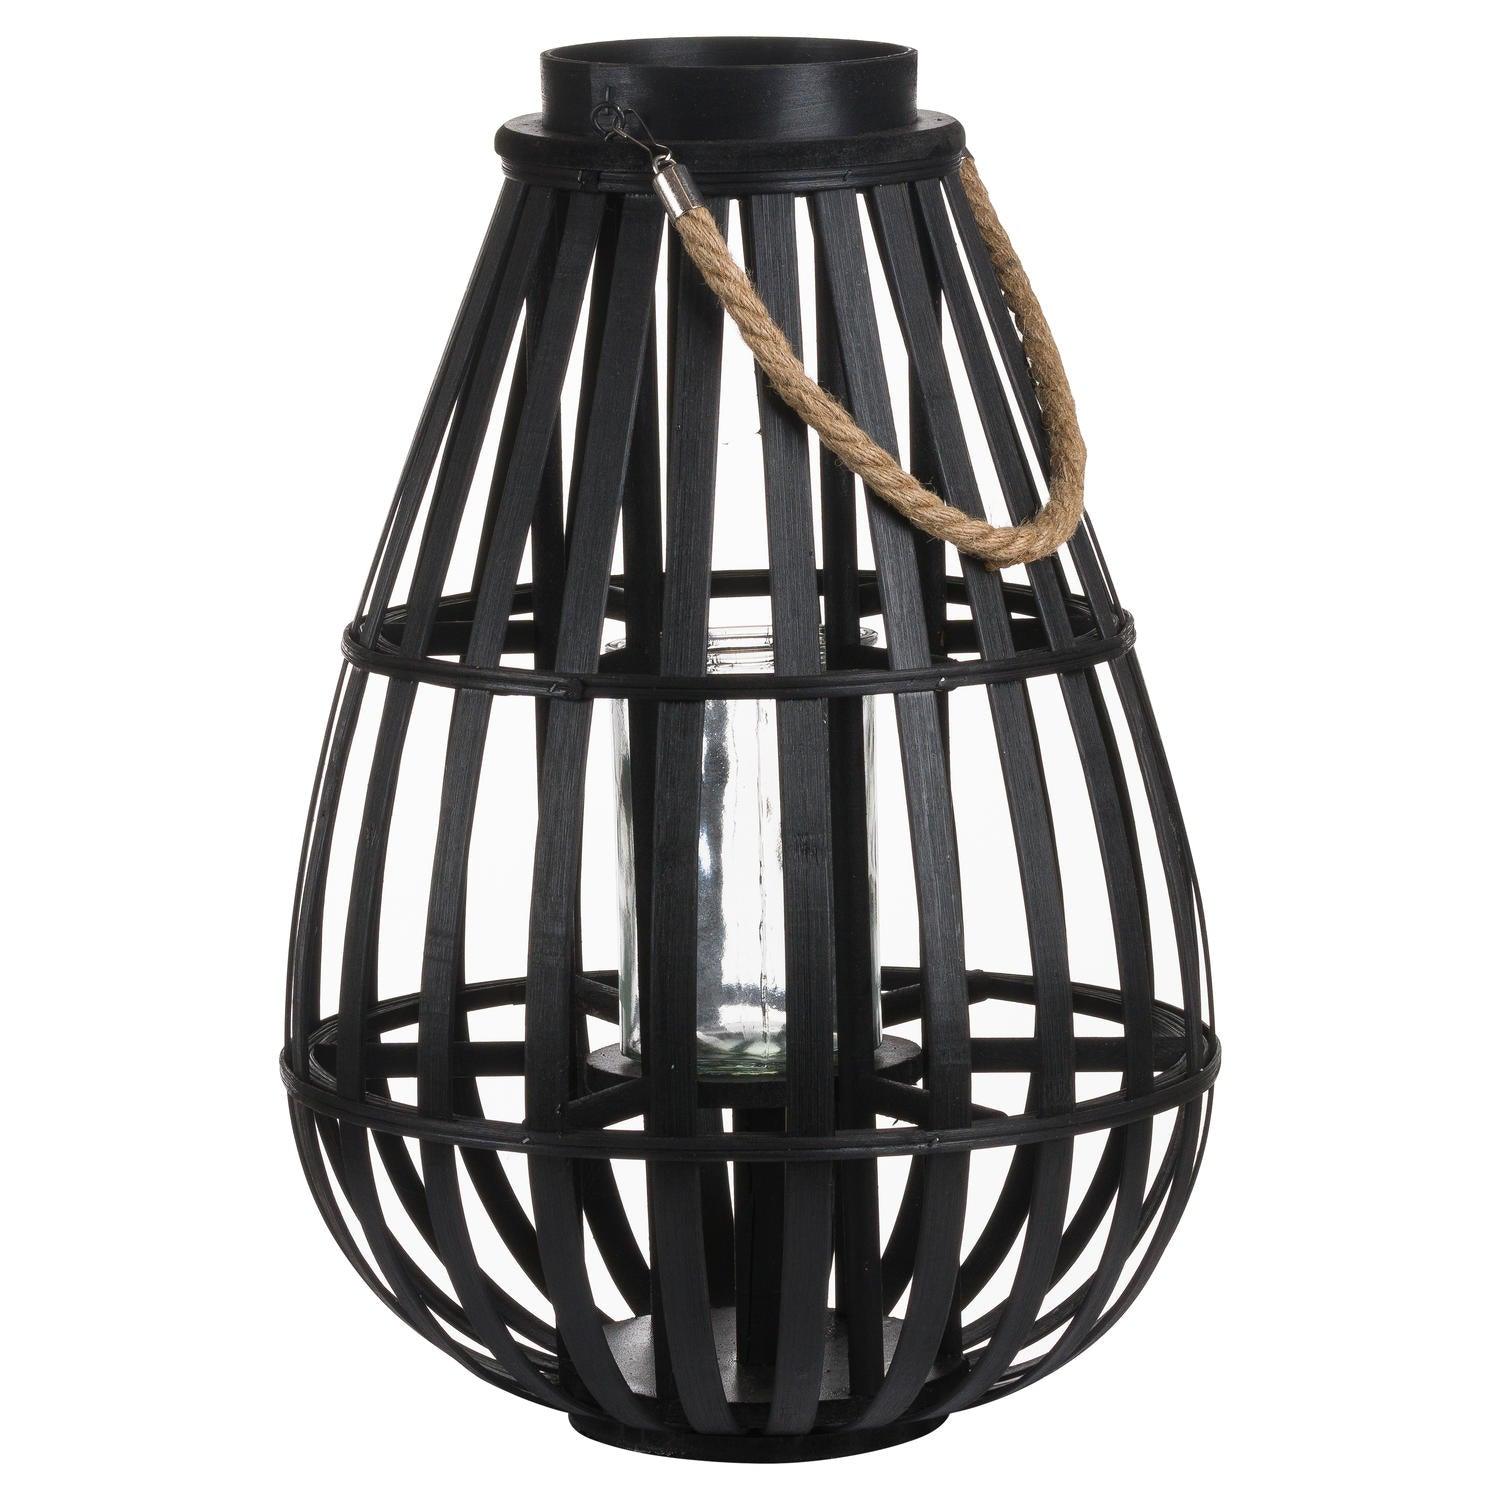 View Domed Wicker Lantern With Rope Detail information